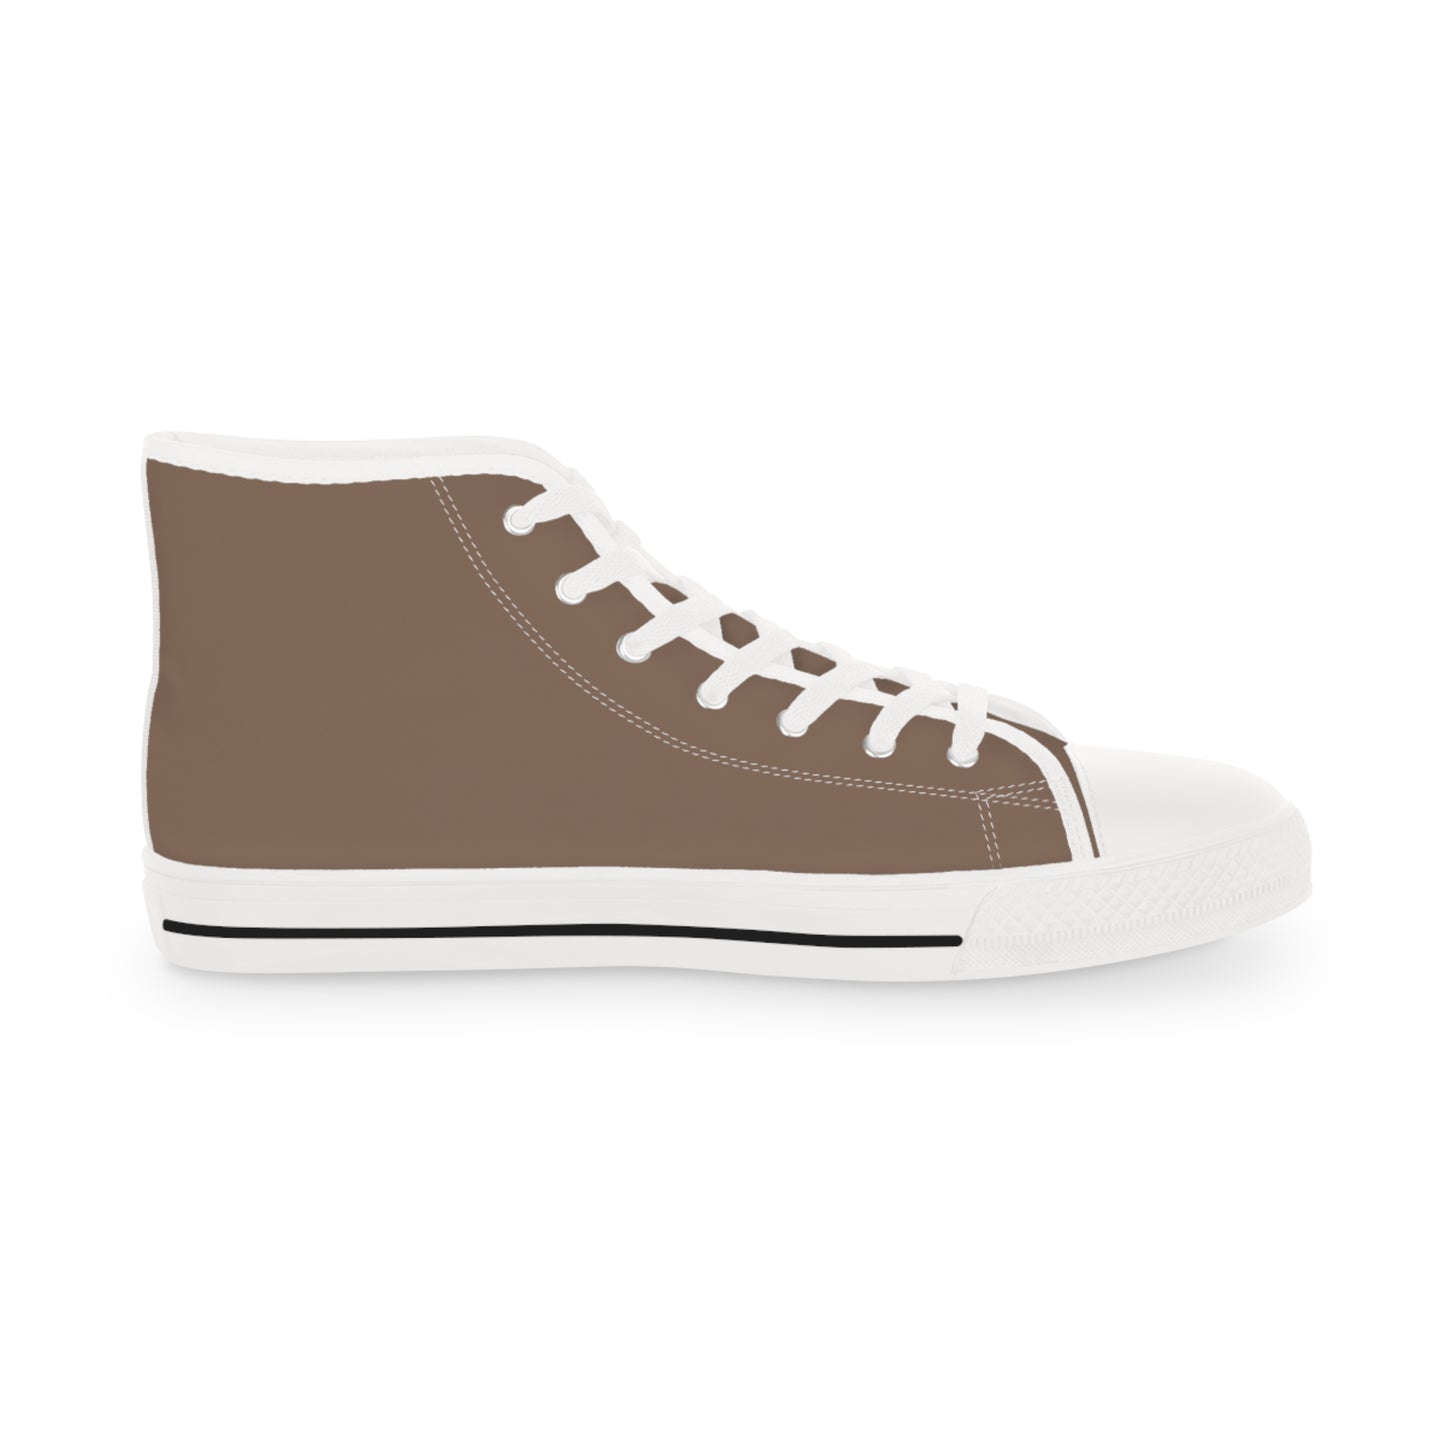 Men's Canvas High Top Solid Color Sneakers - Latte Tan US 14 White sole